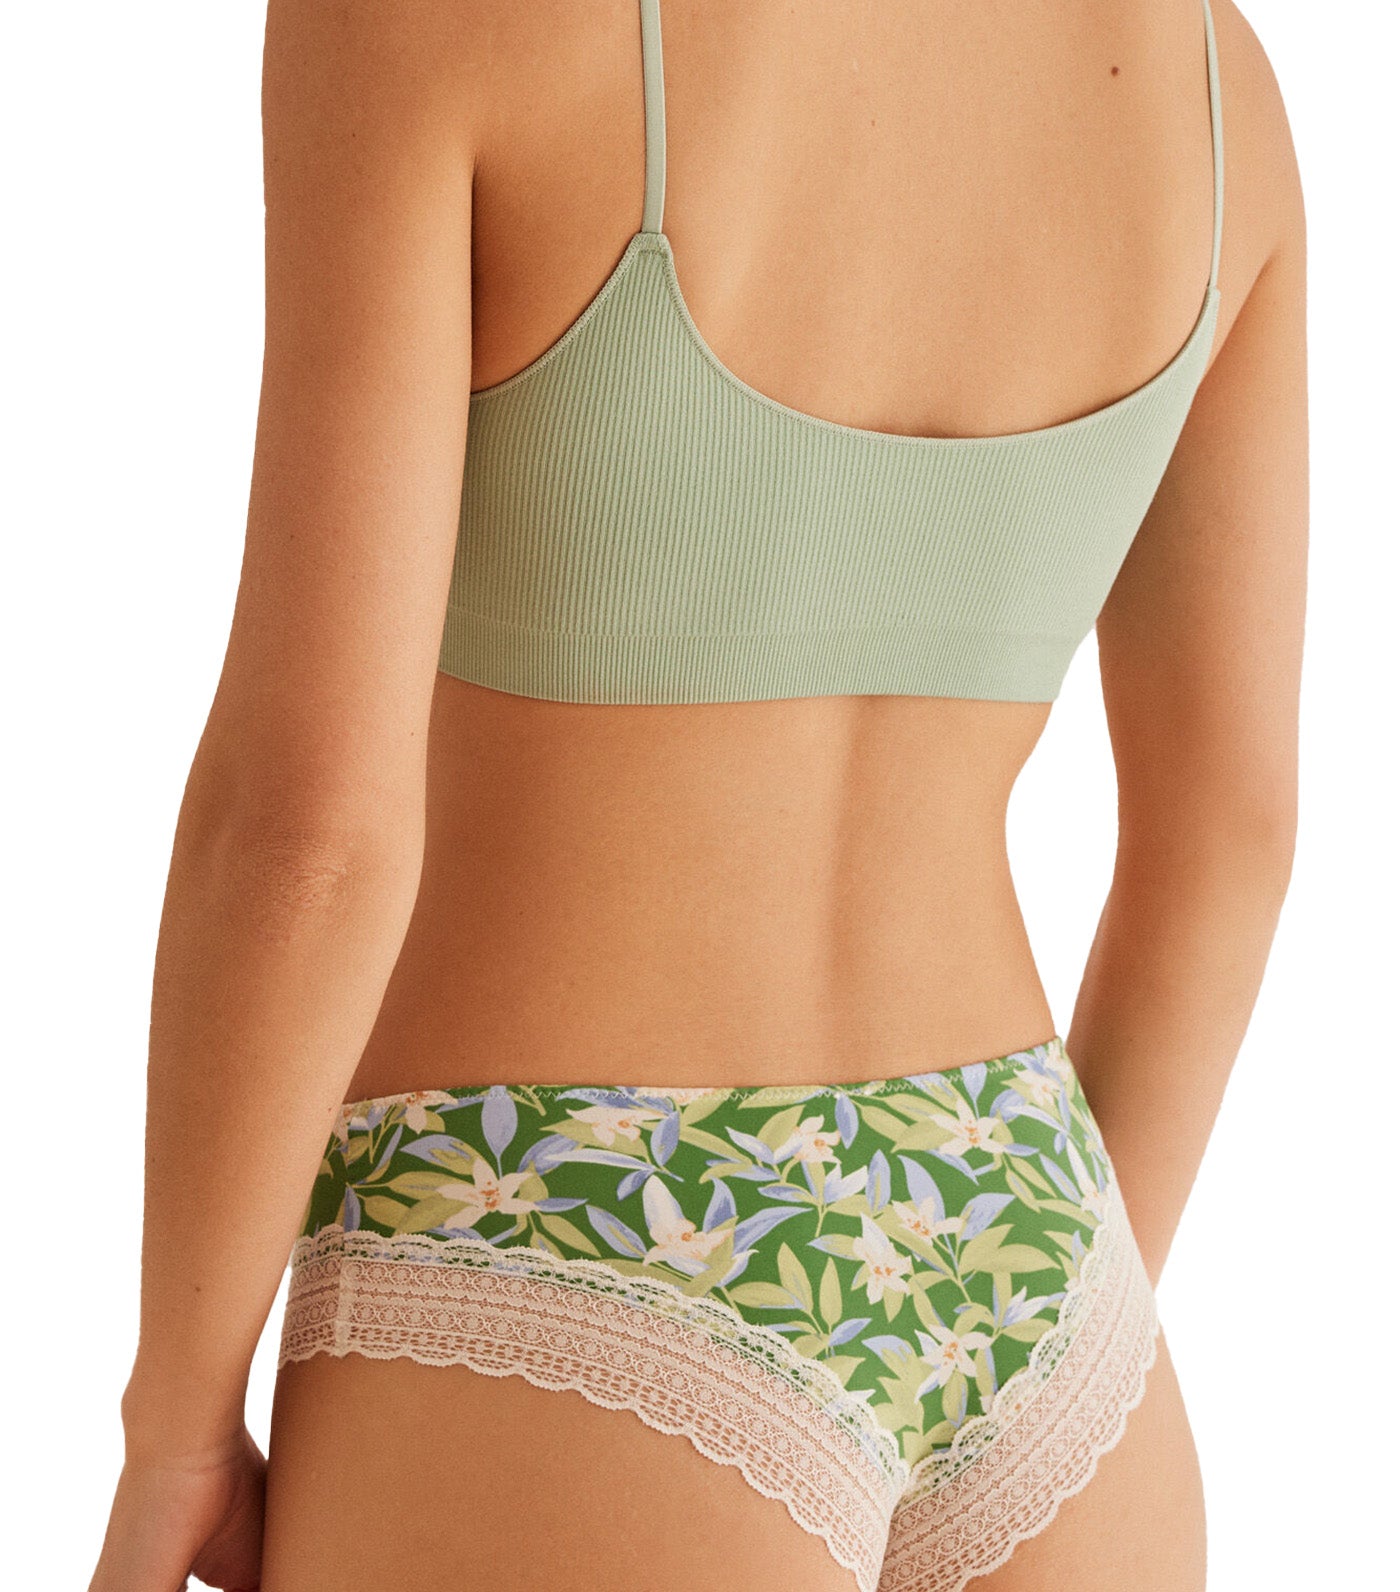 Wide Floral Lace Brazilian Panties Green